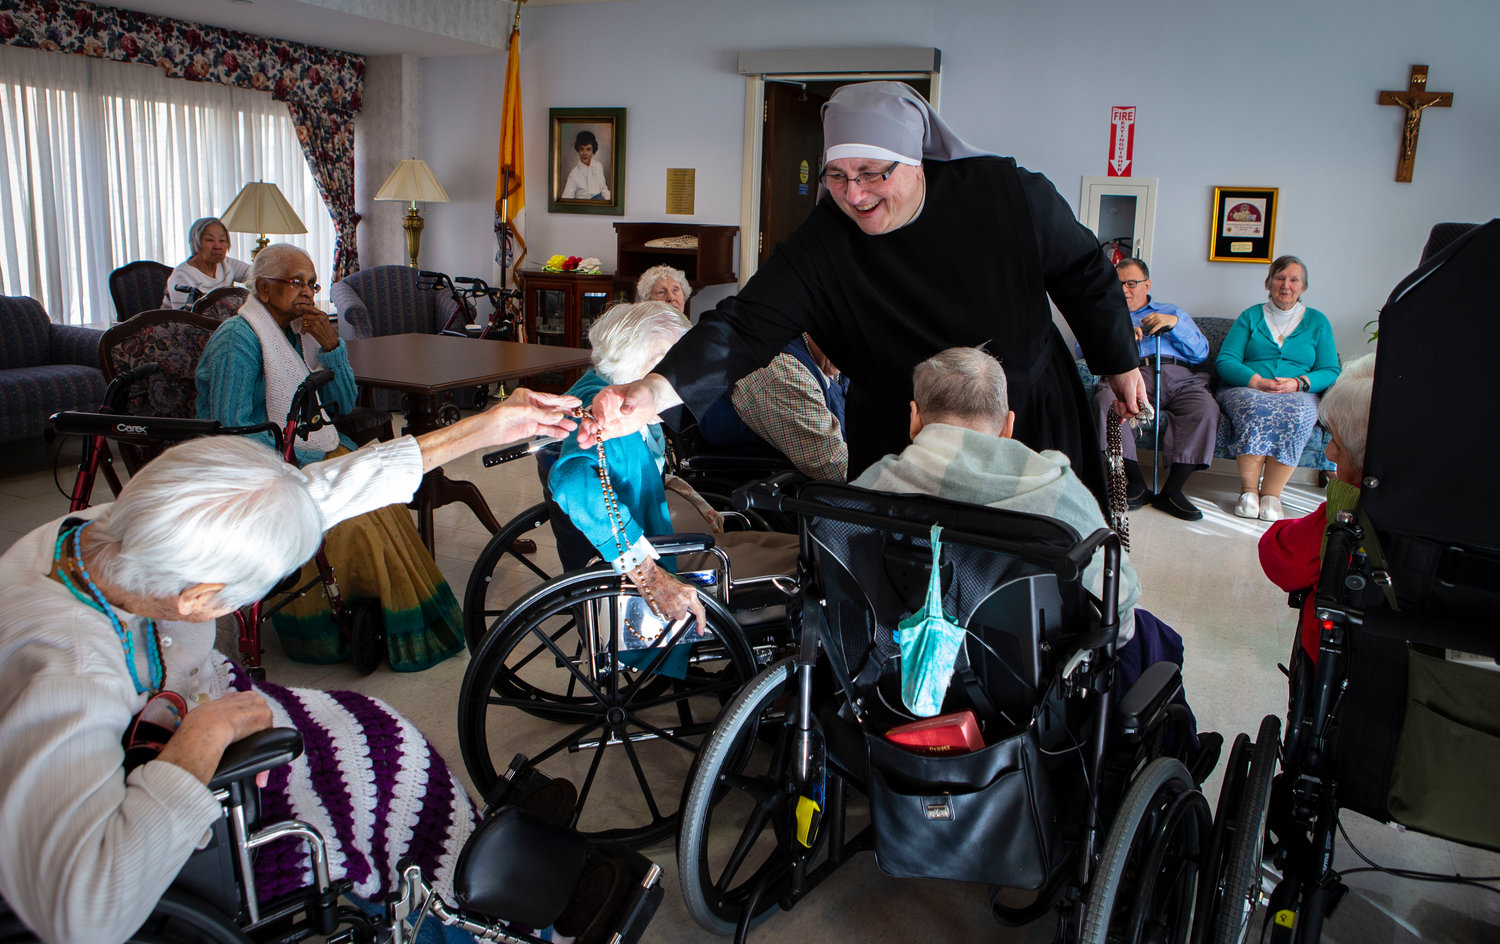 Sister Constance Veit, a Little Sister of the Poor, collects rosaries from elderly residents following prayers at the Jeanne Jugan Residence for senior care in Washington March 25, 2019. Sister Constance is considered a spiritual mother by many of the residents, who said they will honor her on Mother’s Day. (CNS photo/Chaz Muth) See MOTHERS-DAY-NUN April 26, 2019.